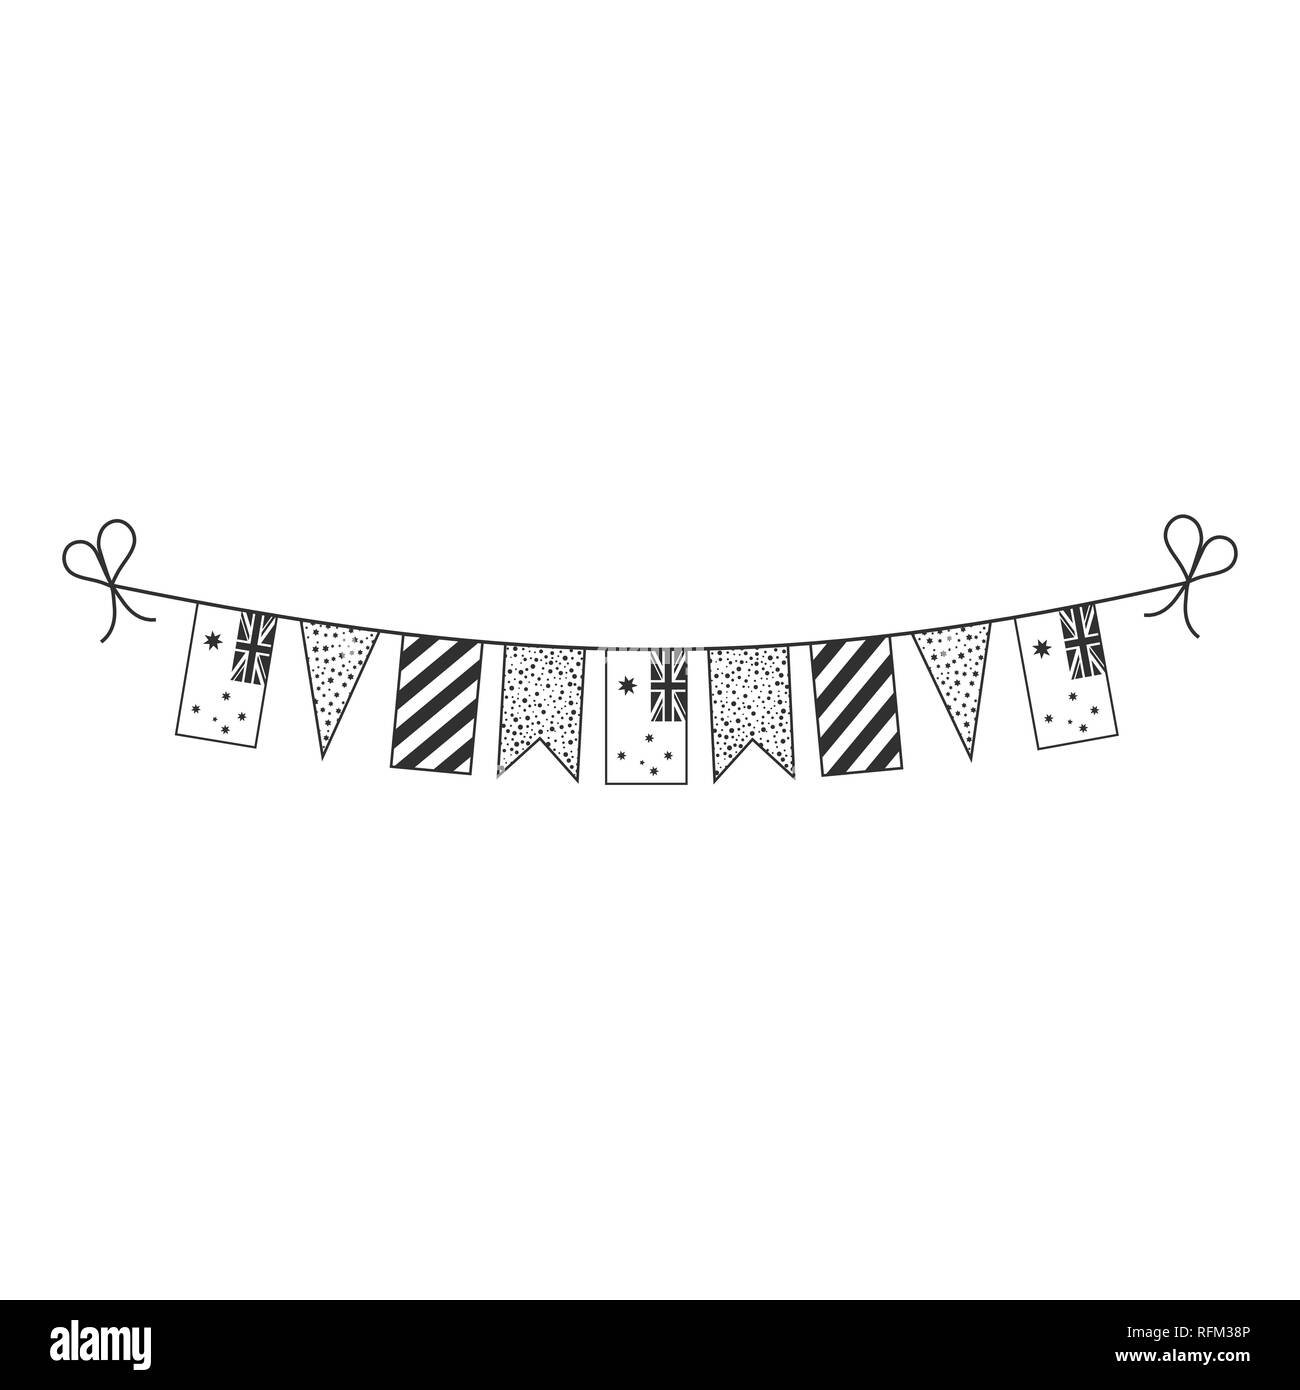 Decorations bunting flags for Australia national day holiday in black outline flat design. Independence day or National day holiday concept. Stock Vector